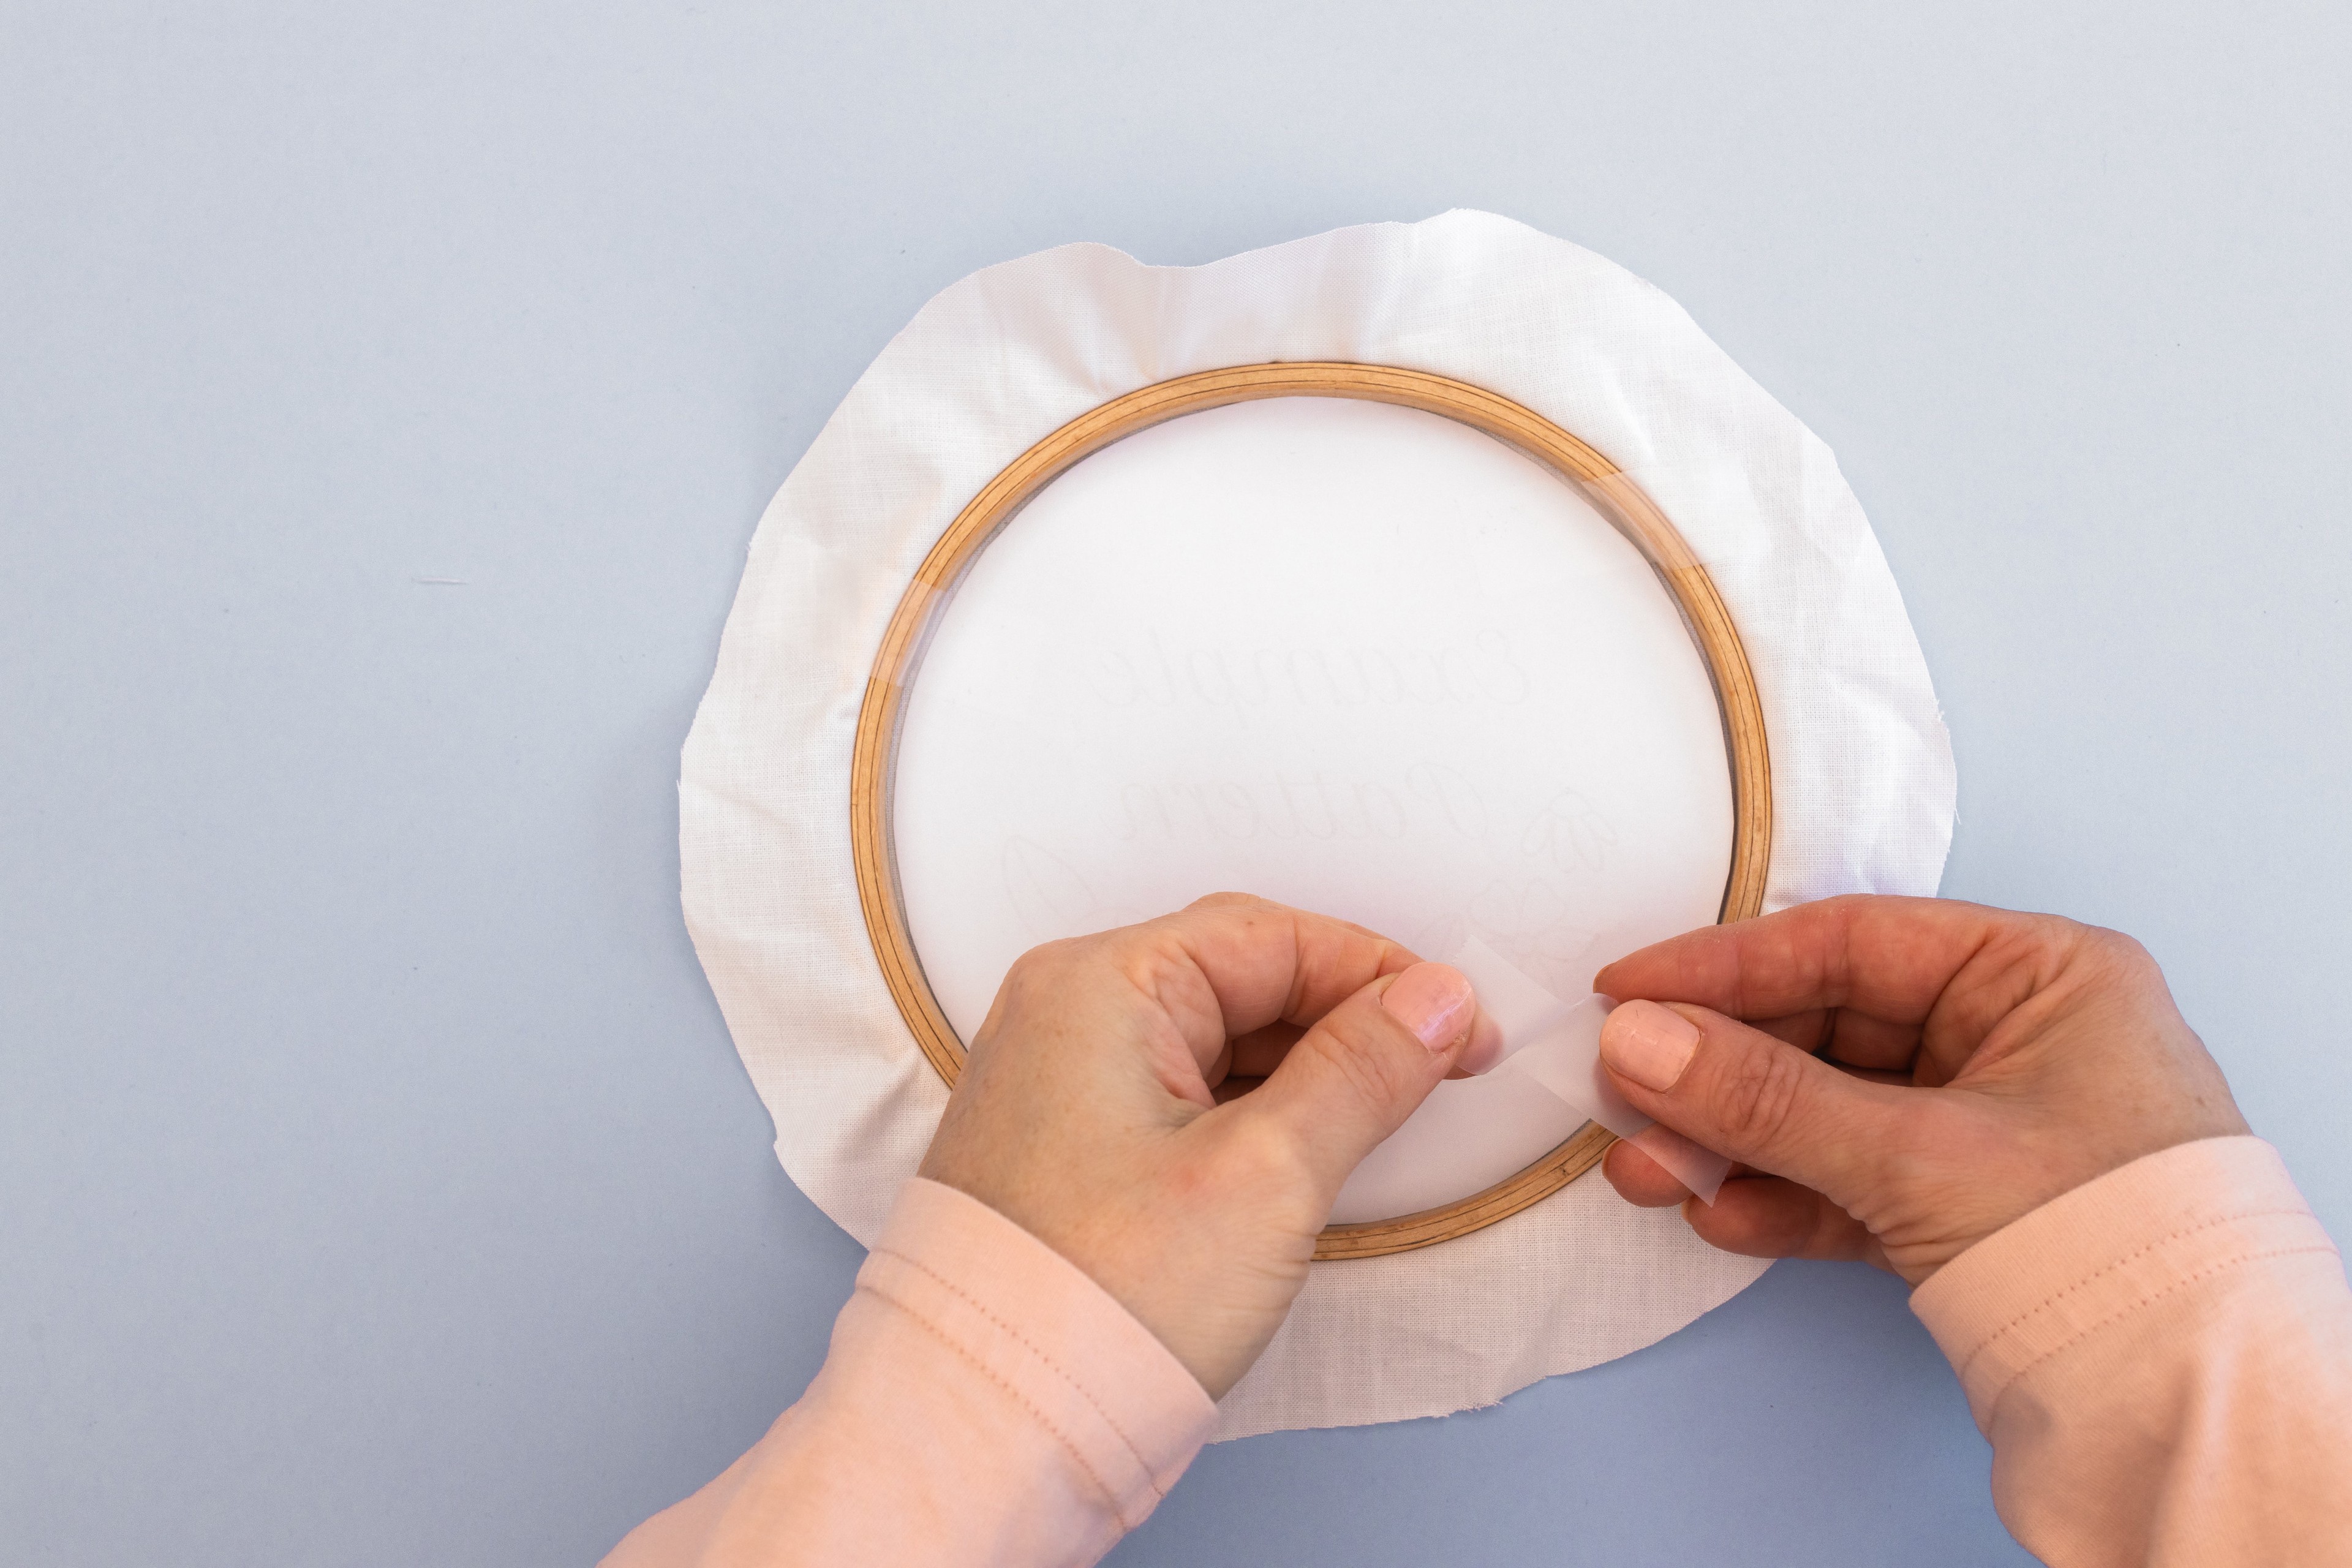 A hand holds a cellotape in front of the dressed hoop.